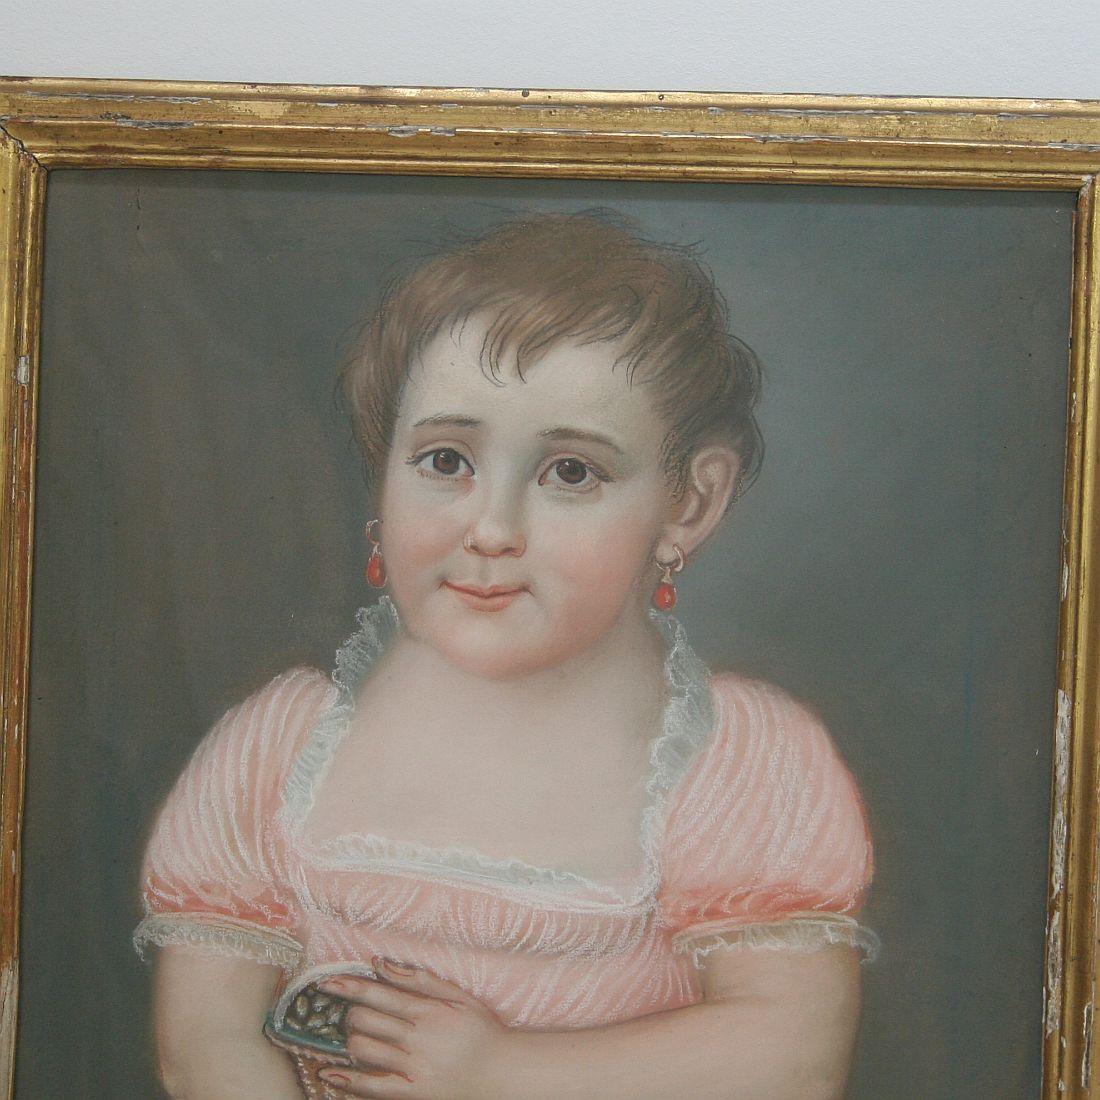 Beautiful pastel portrait of a young girl, France early 19th century, dated 1813. Weathered, small losses.